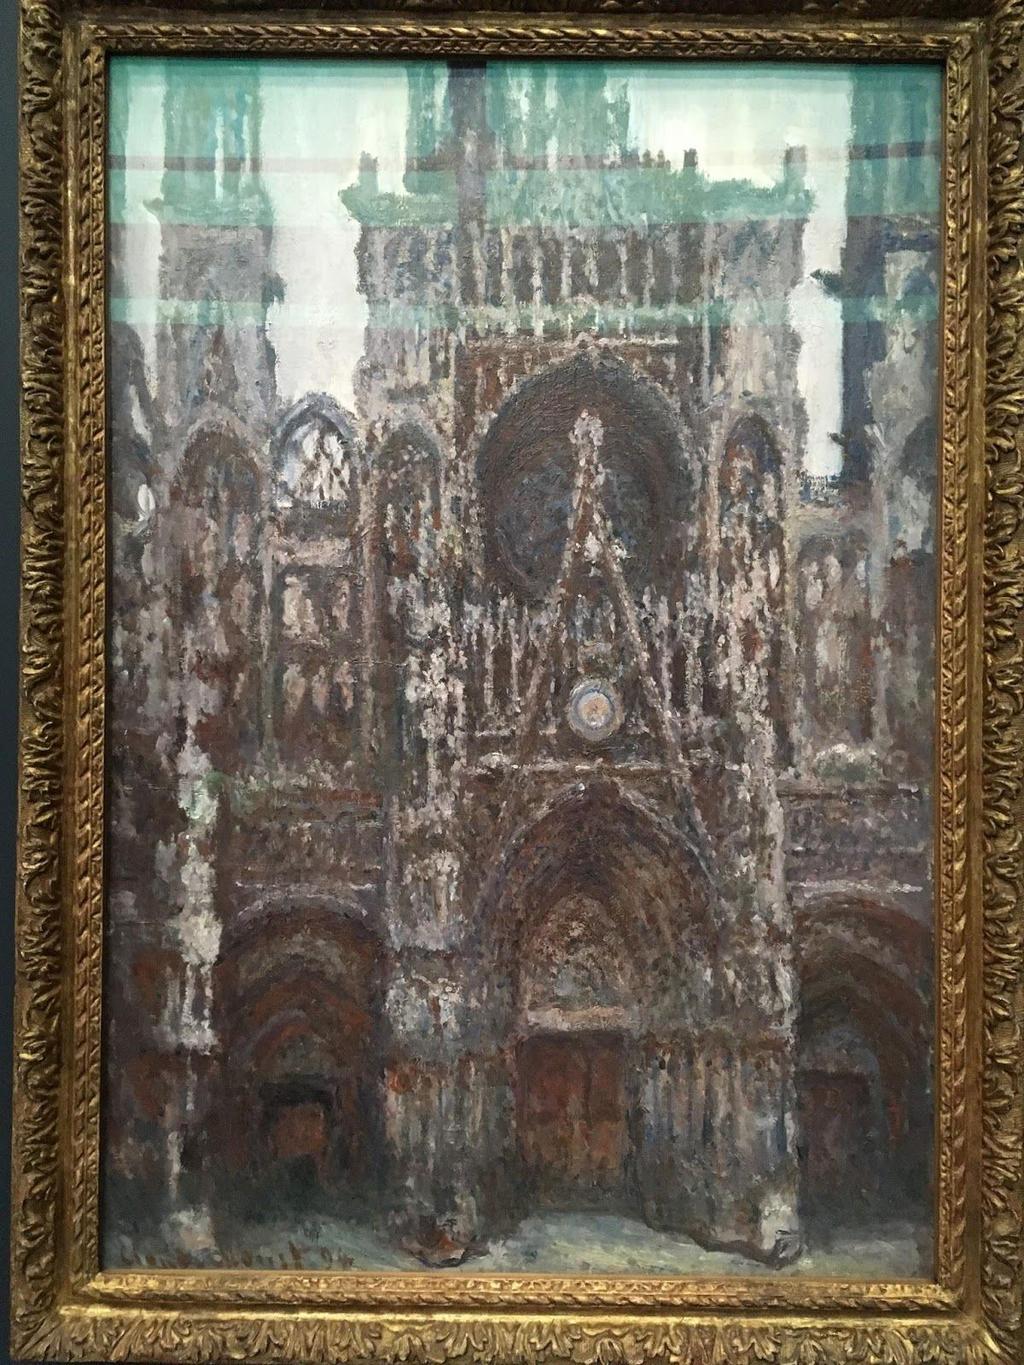 1892 Monet painted more than 30 views of the Rouen Cathedral s decorative facade. Monet rented a room opposite that gave him the best view of the sun moving over the Cathedral s facade.